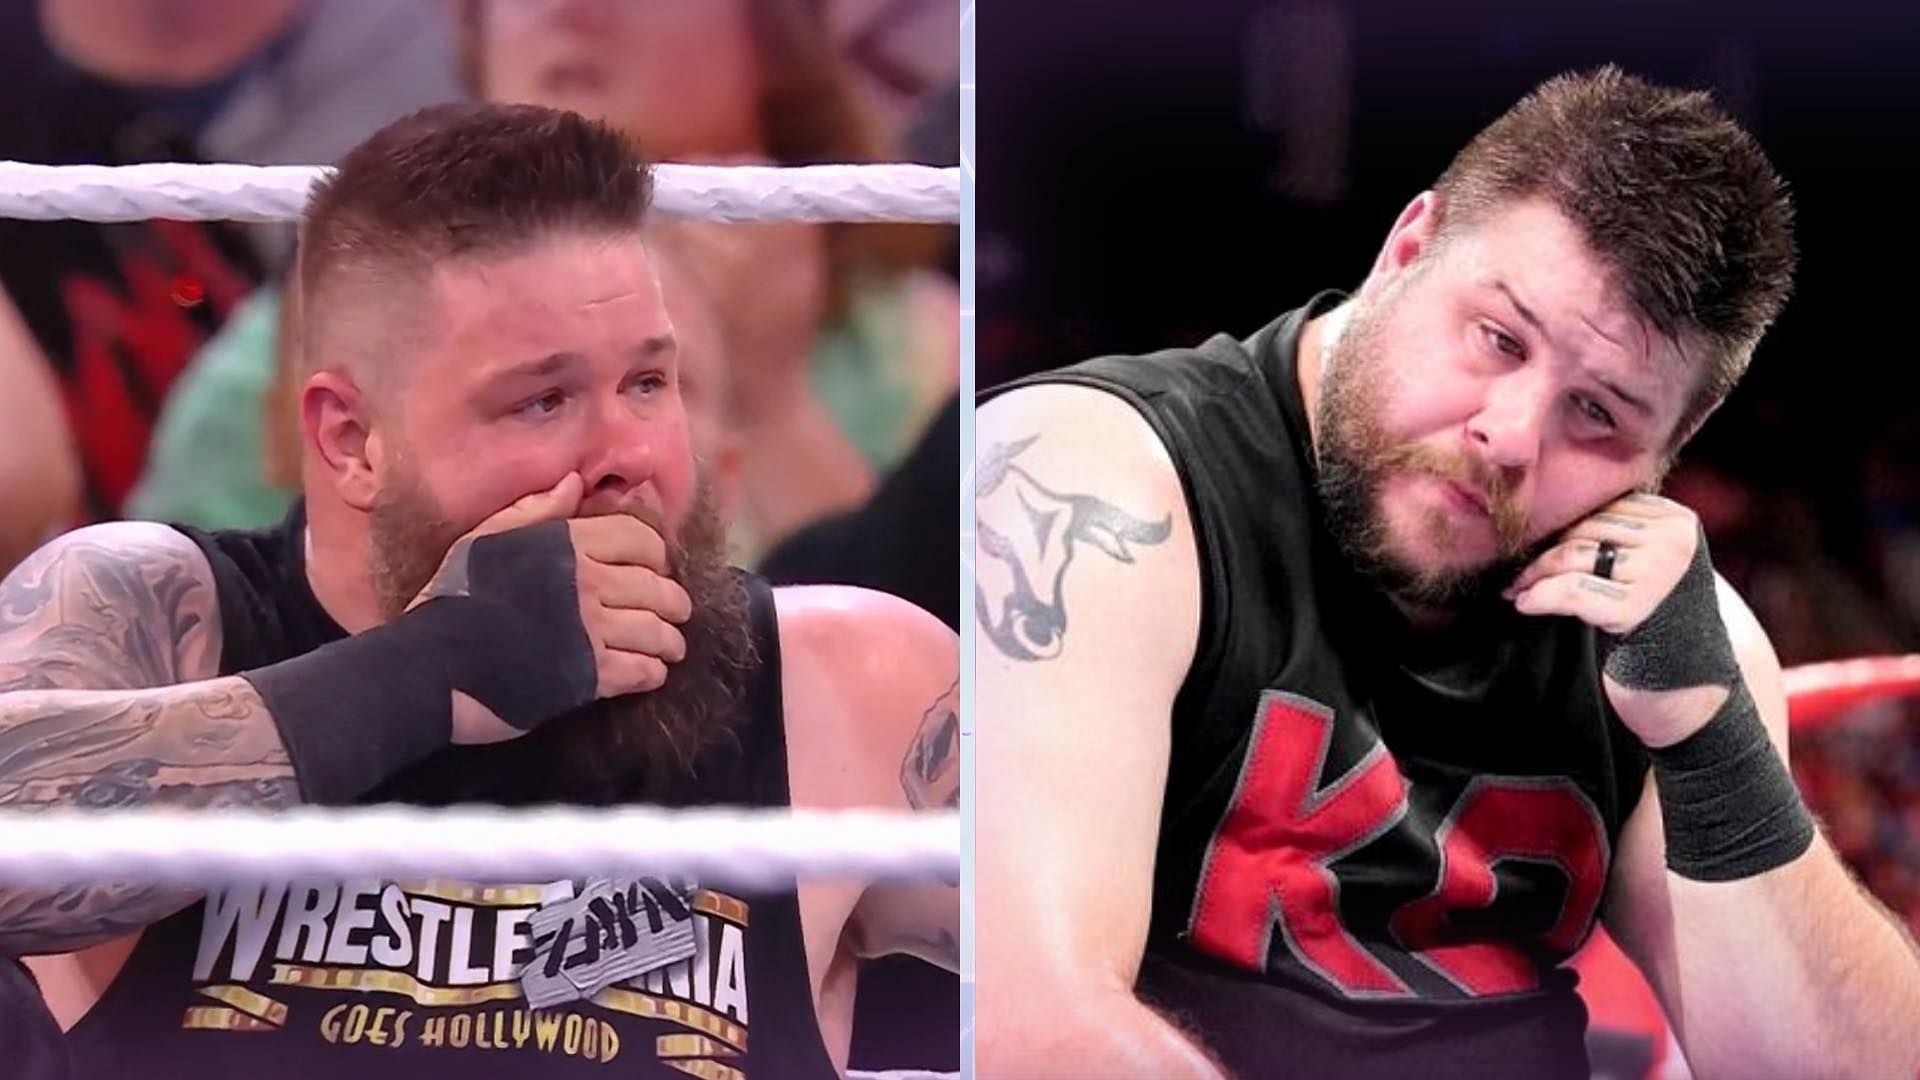 Kevin Owens has become one of the most prominent wrestlers in WWE